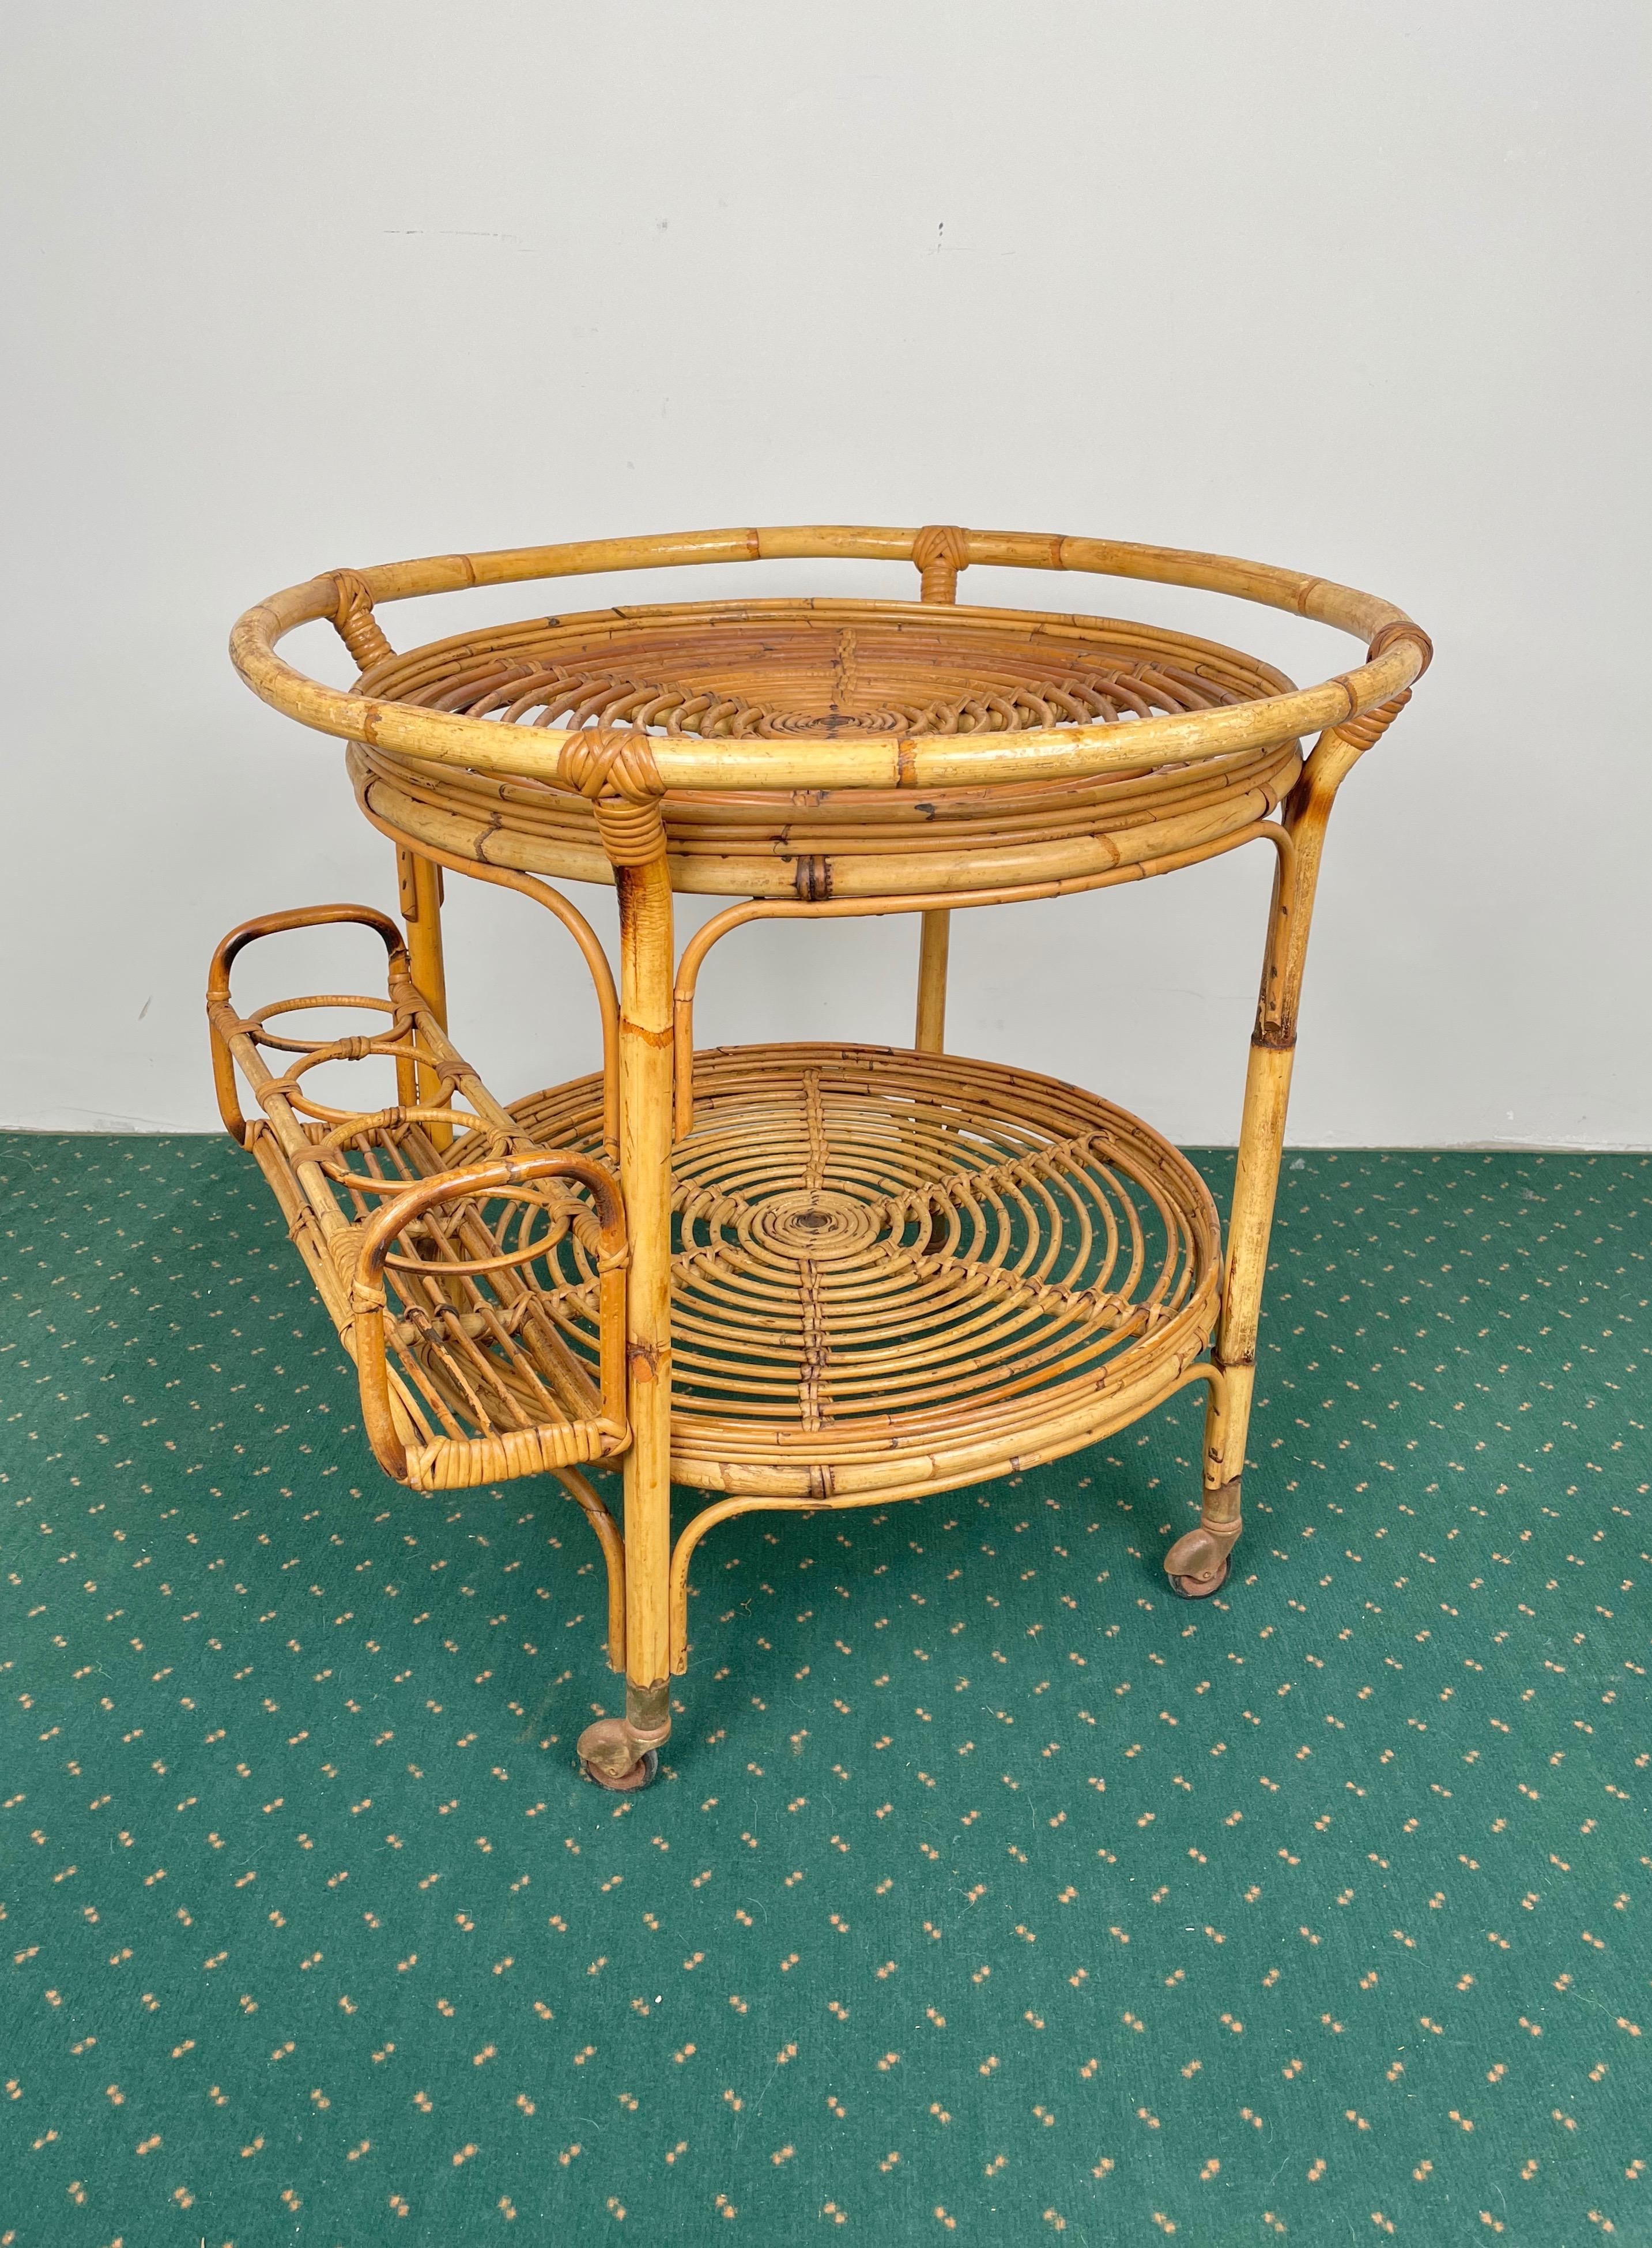 Elegant round serving bar cart in bamboo & rattan structure featuring two shelves. The upper one is framed by a bamboo handle and the lower one features four bottle holders mounted externally. Made in Italy in the 1960s.